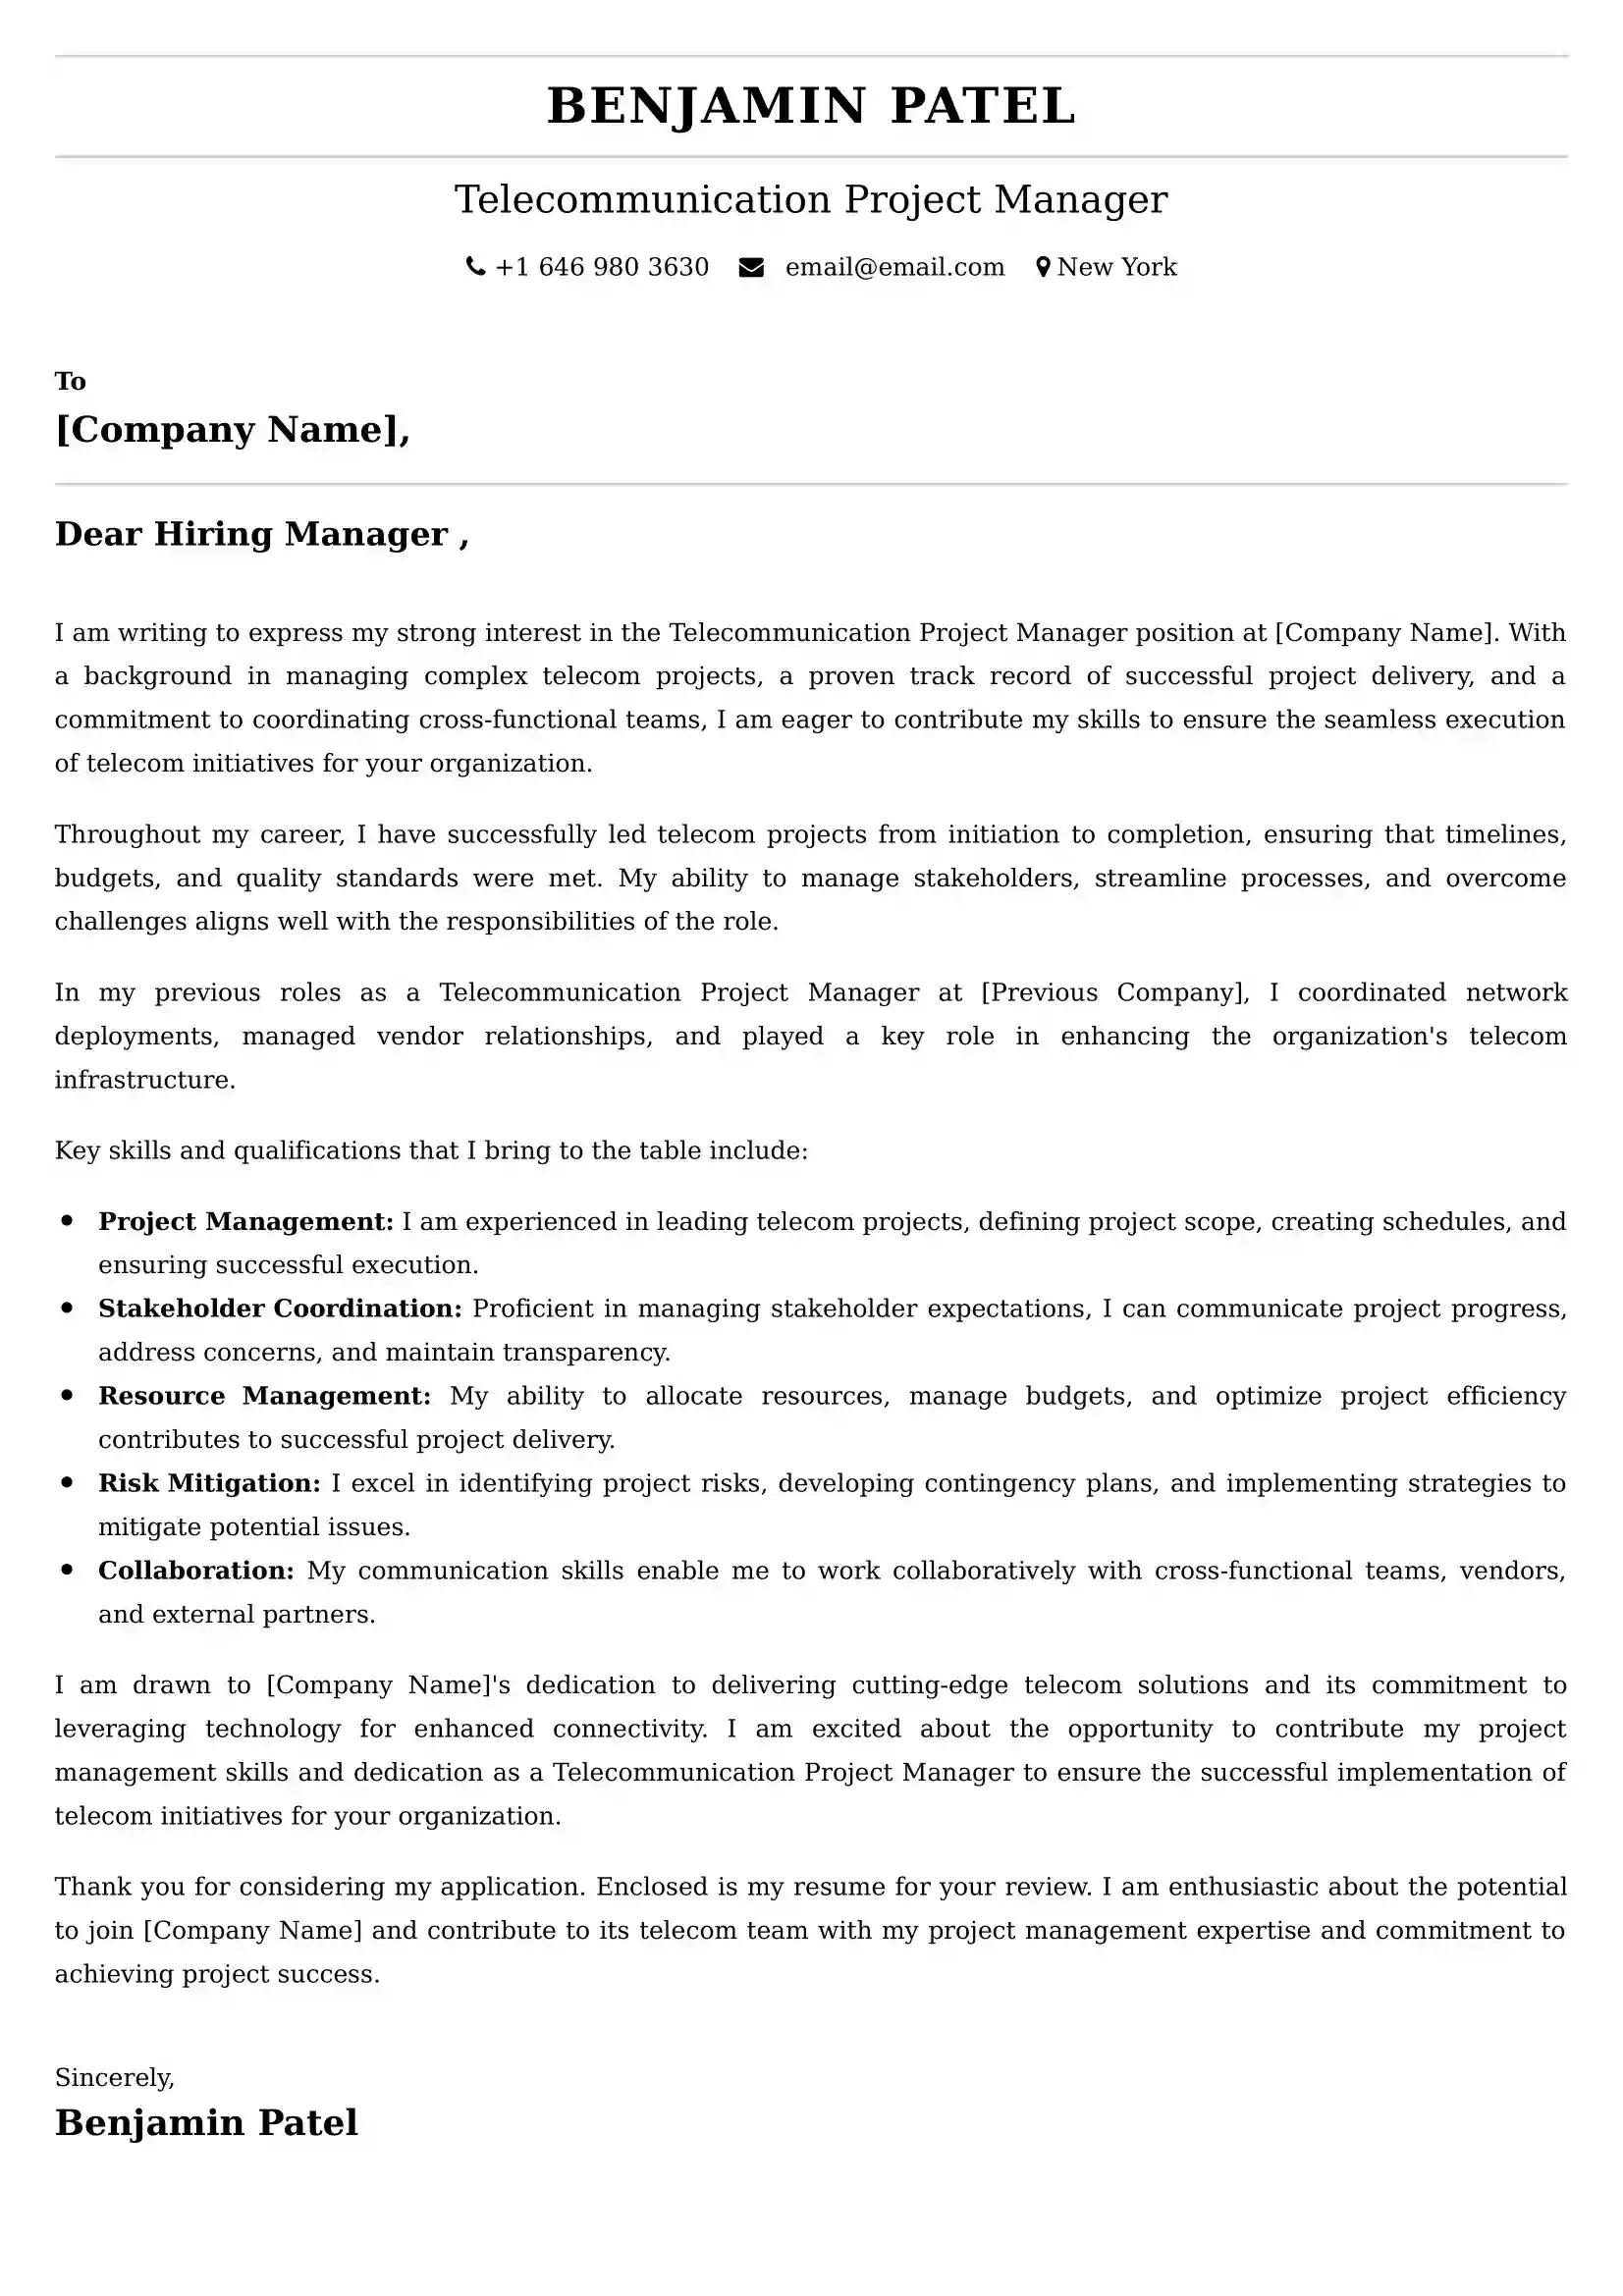 Telecommunication Project Manager Cover Letter Examples UK - Tips and Guide